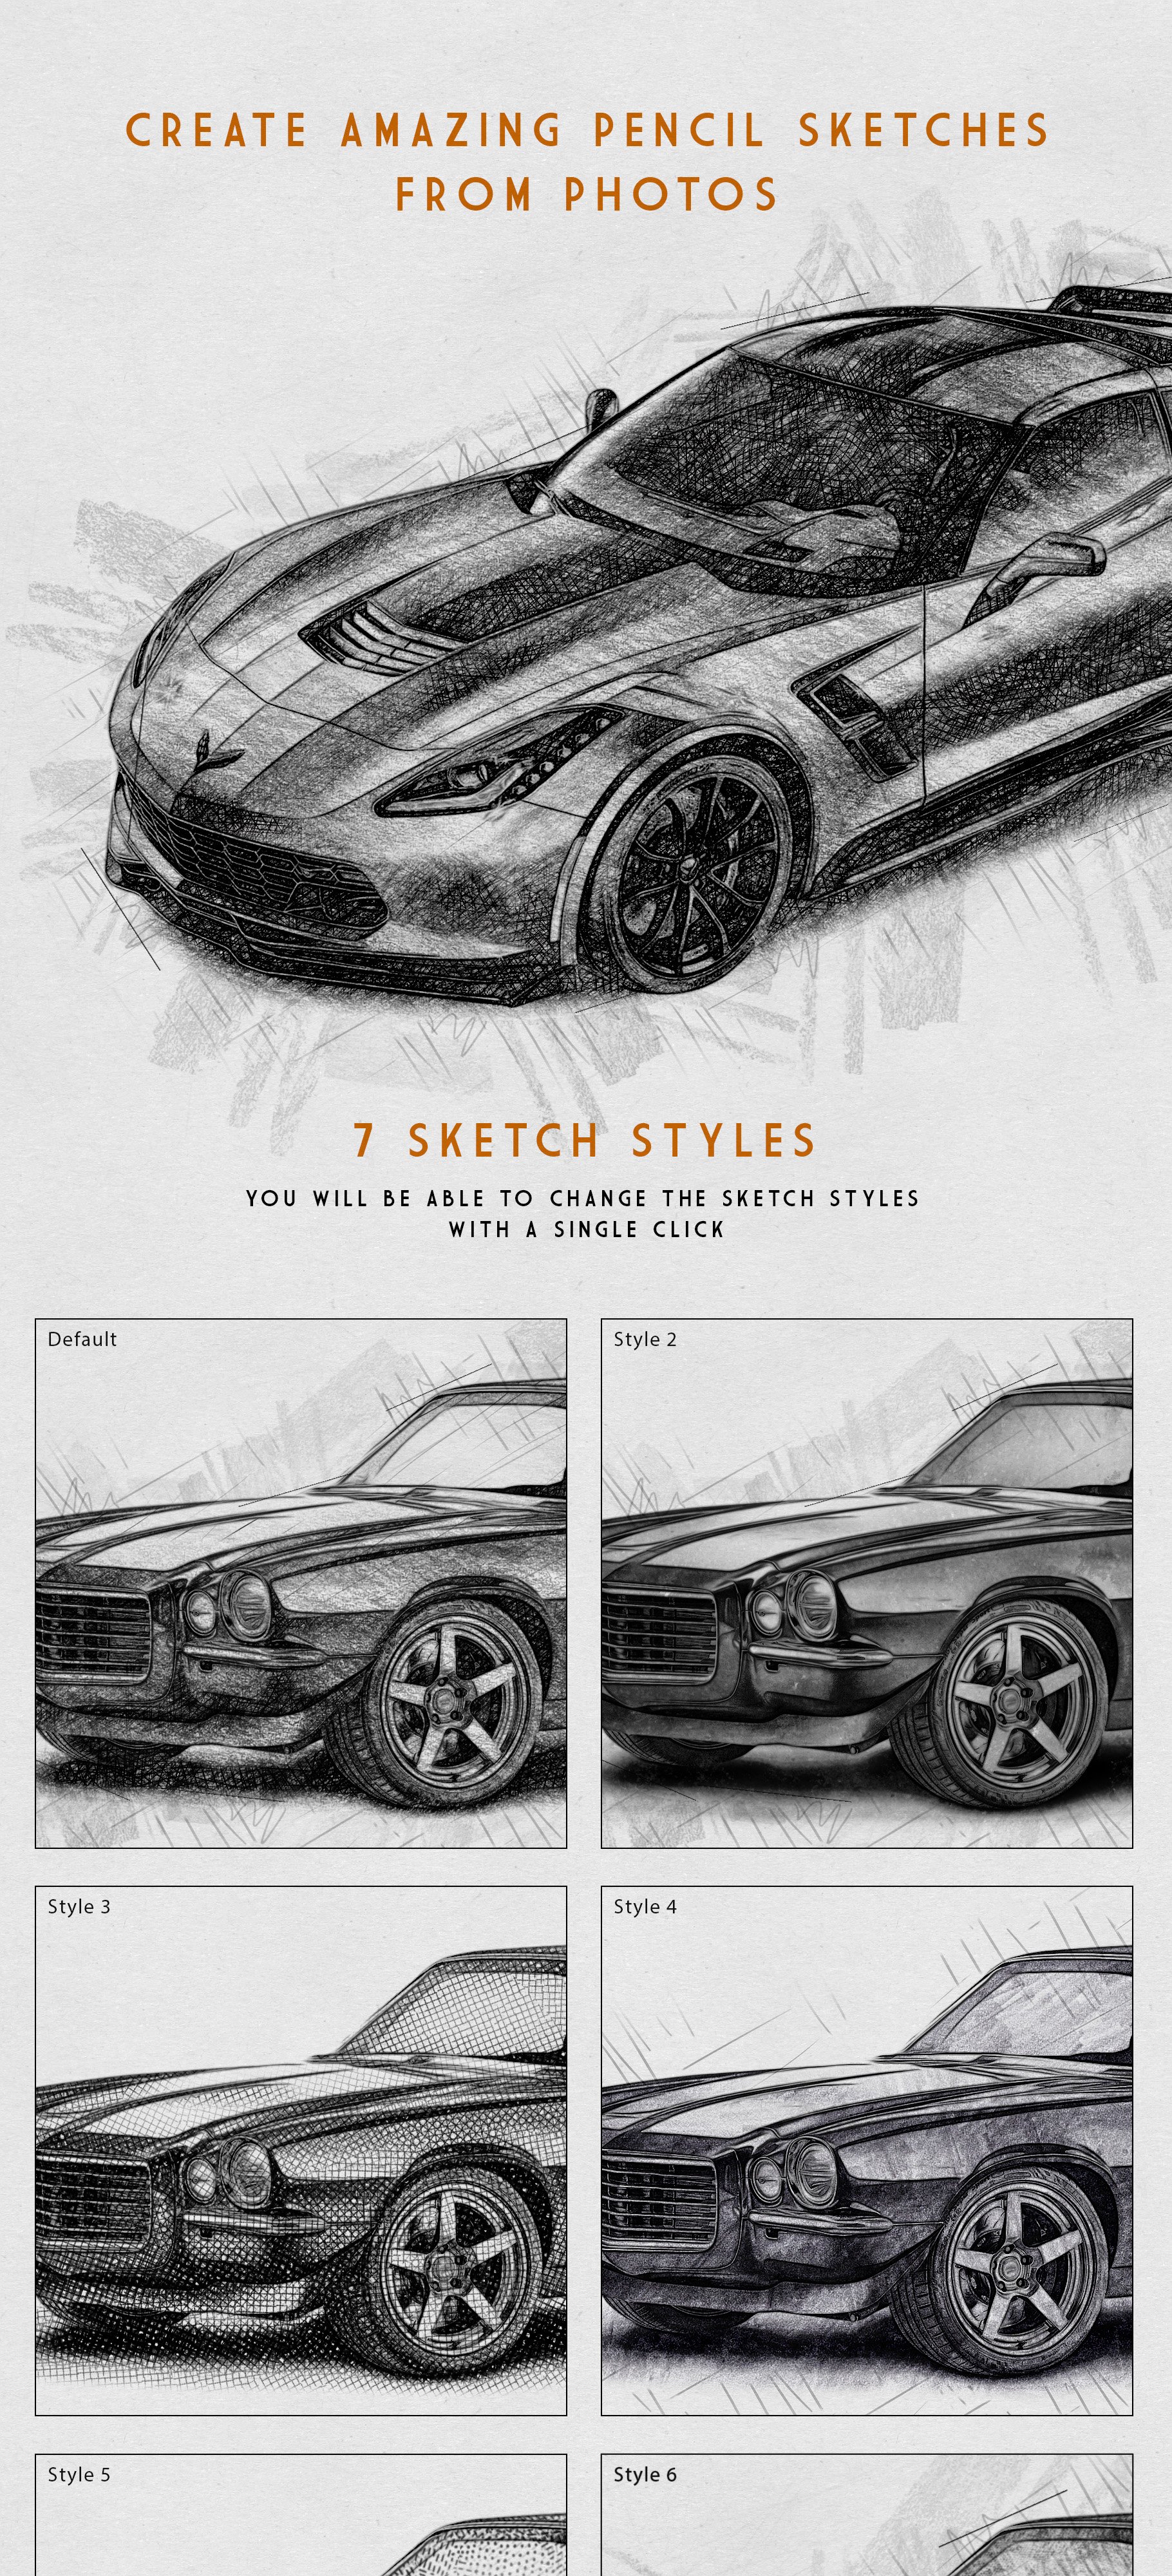 Free Photoshop Actions: Sketch and Painting Effects Set